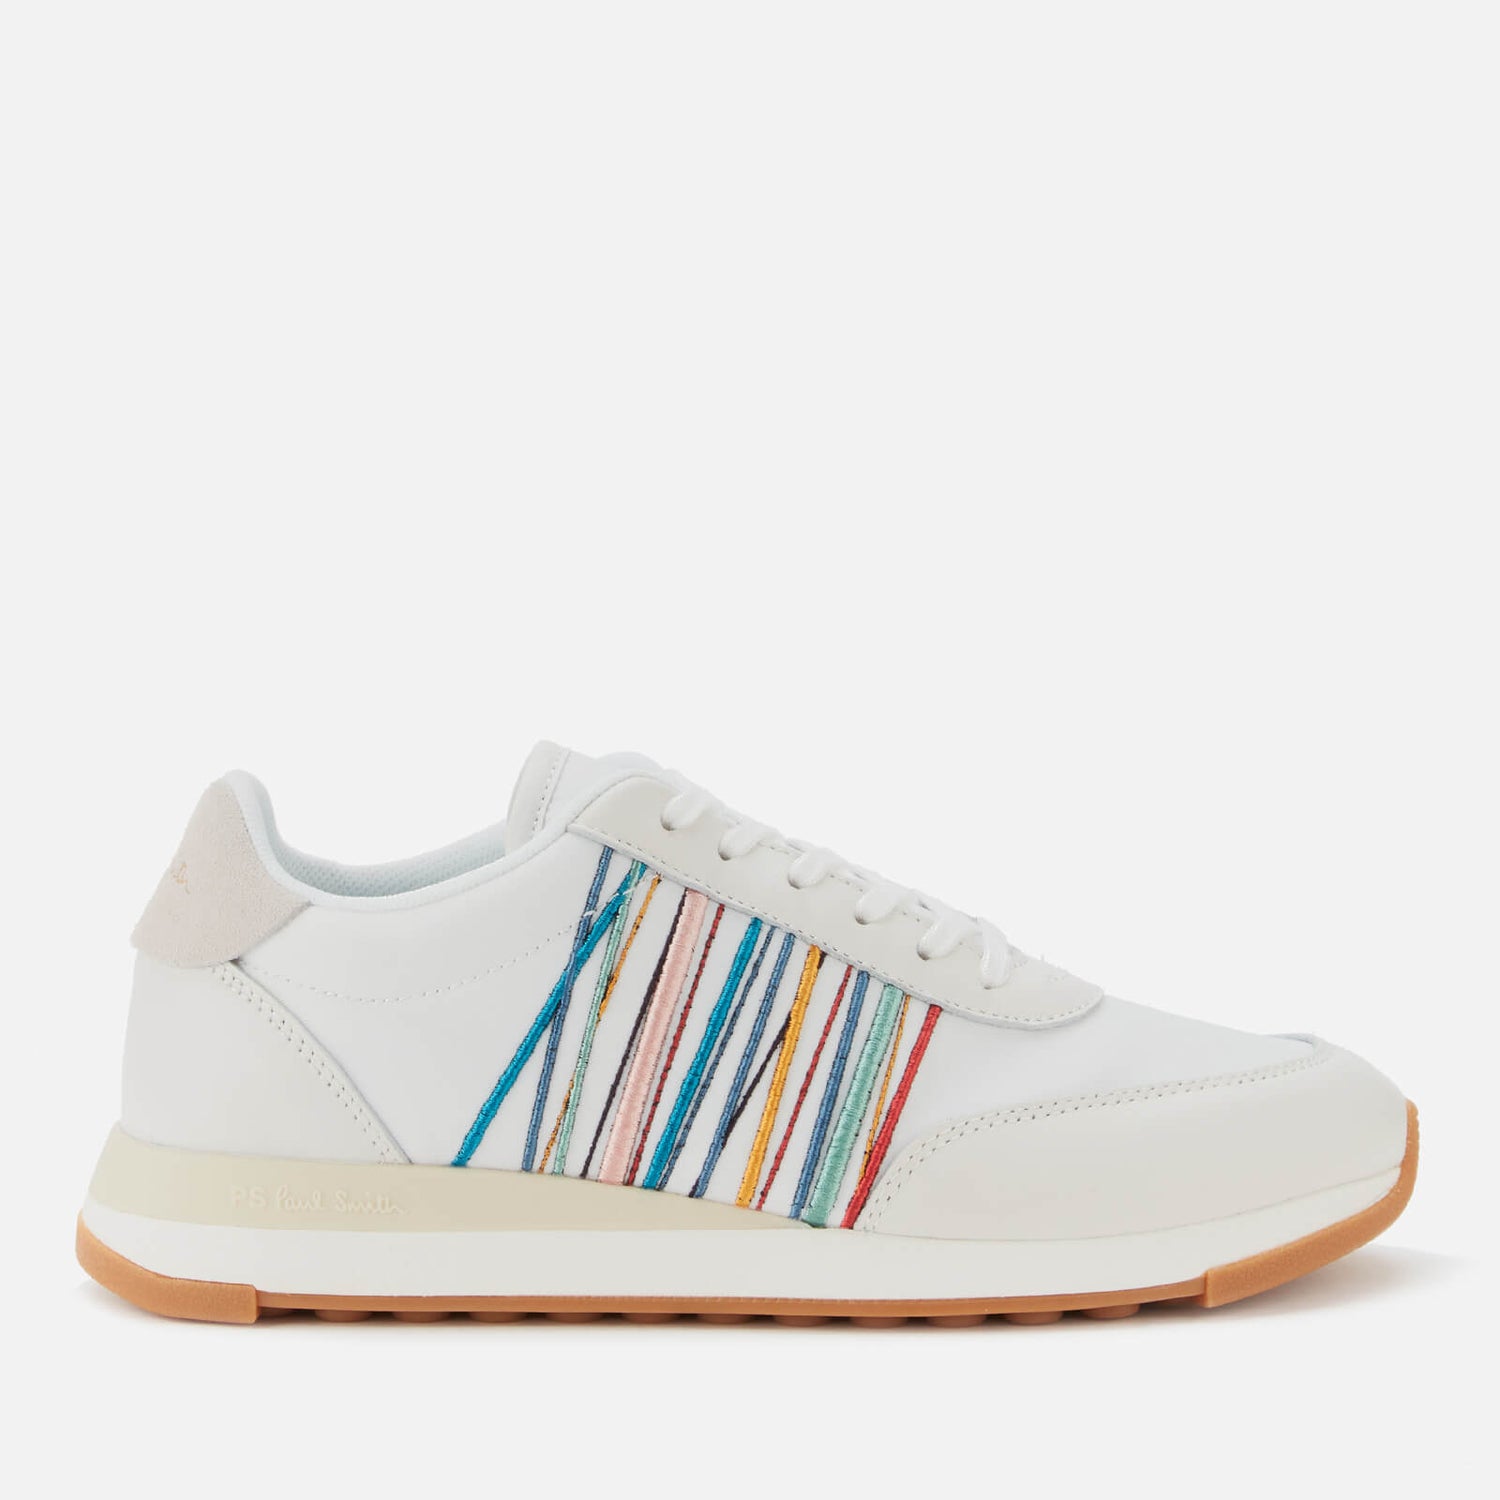 Paul Smith Women's Artemis Running Style Trainers - White Embroidery ...